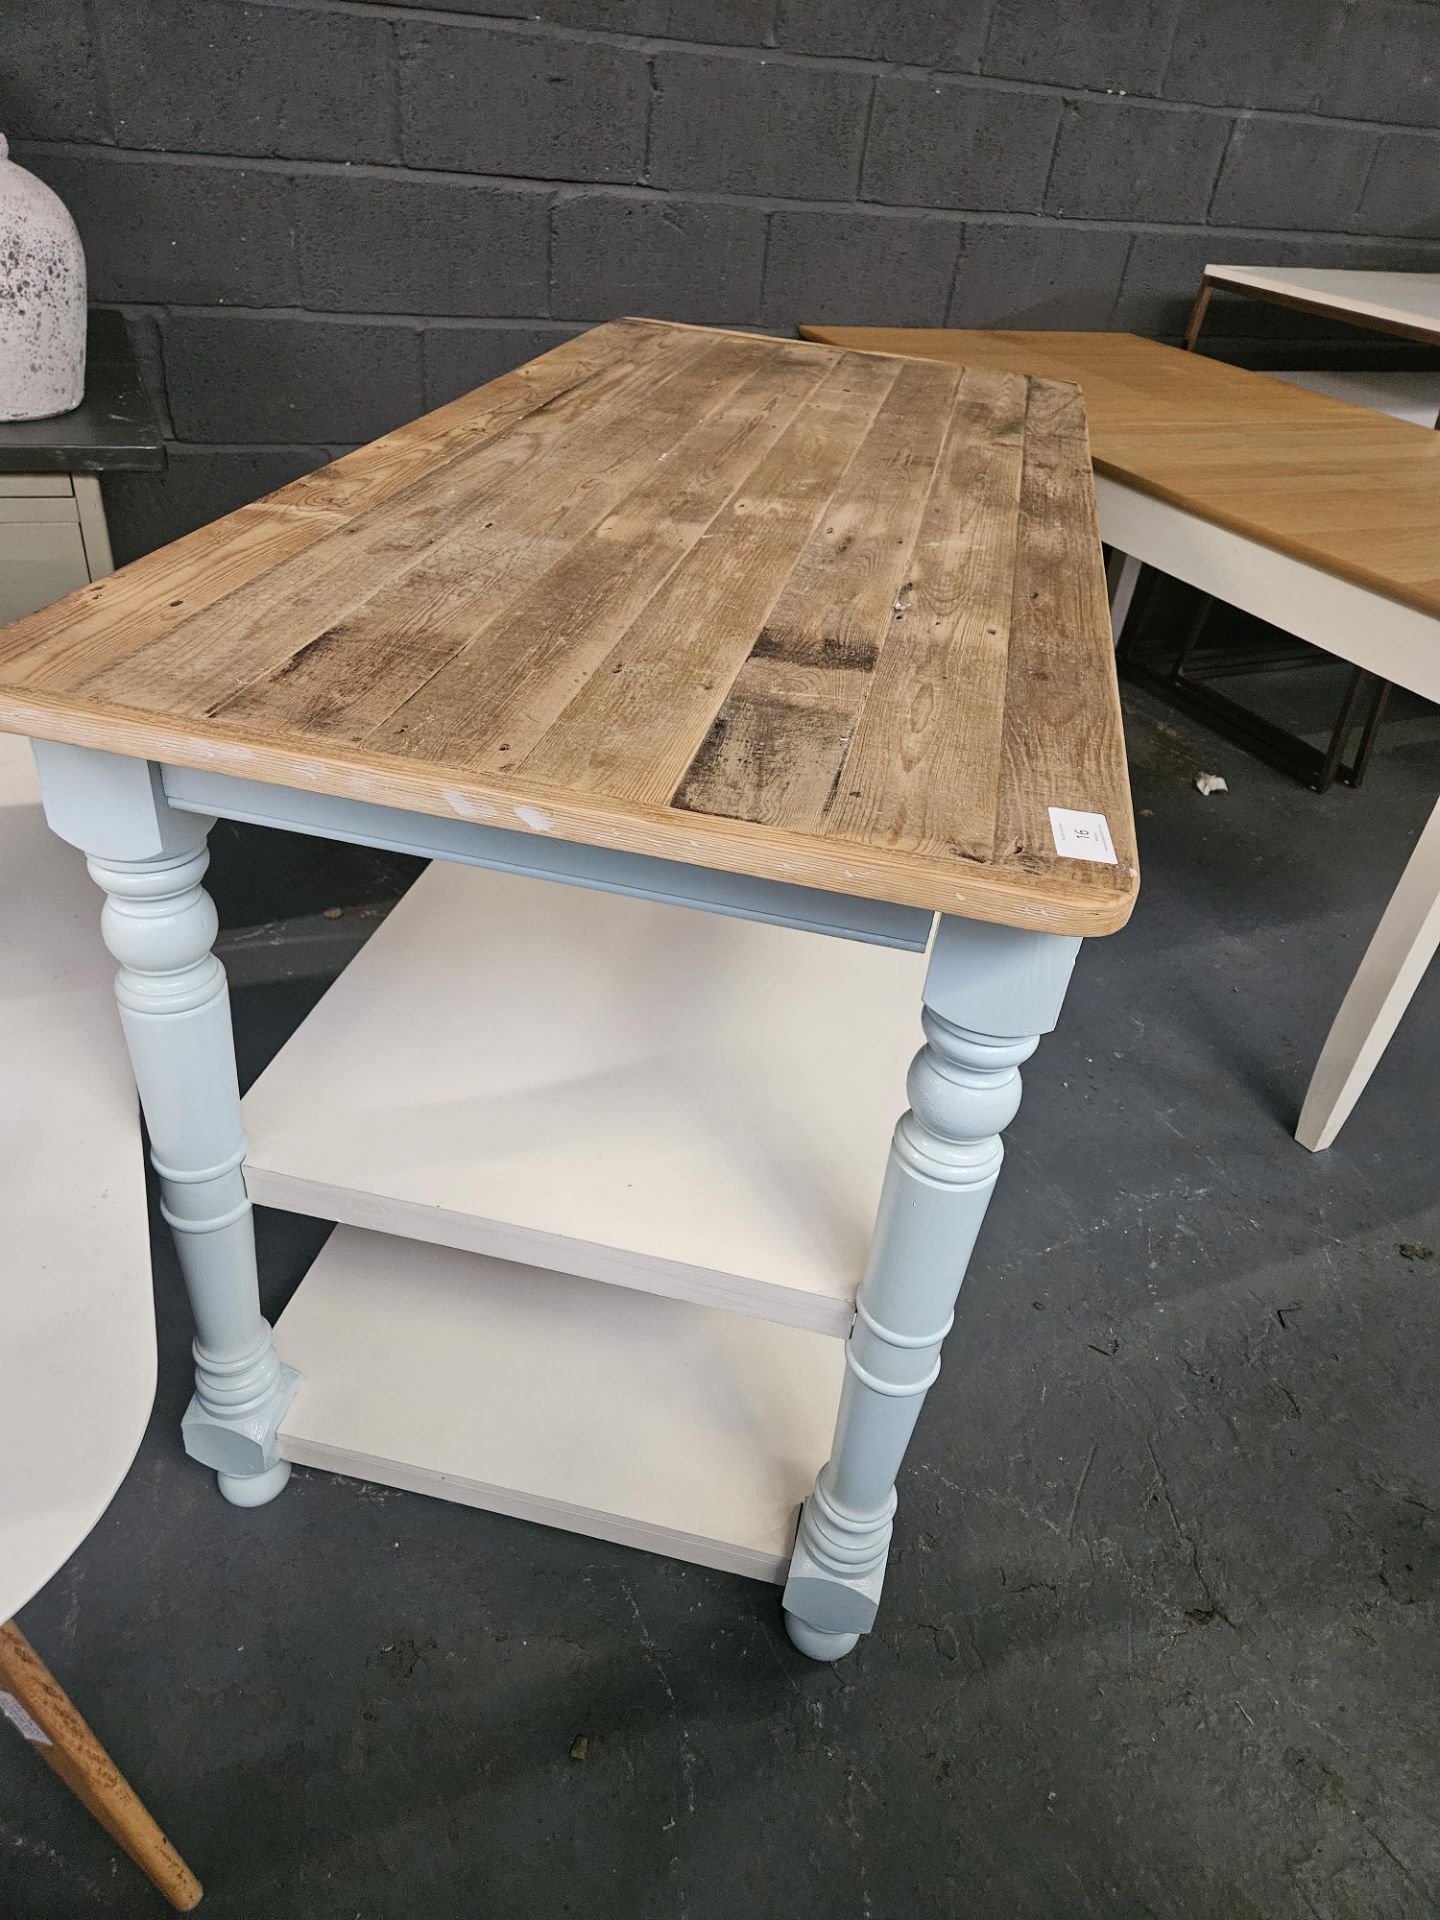 Wooden Table With Painted Legs & Under shelves - Image 2 of 3